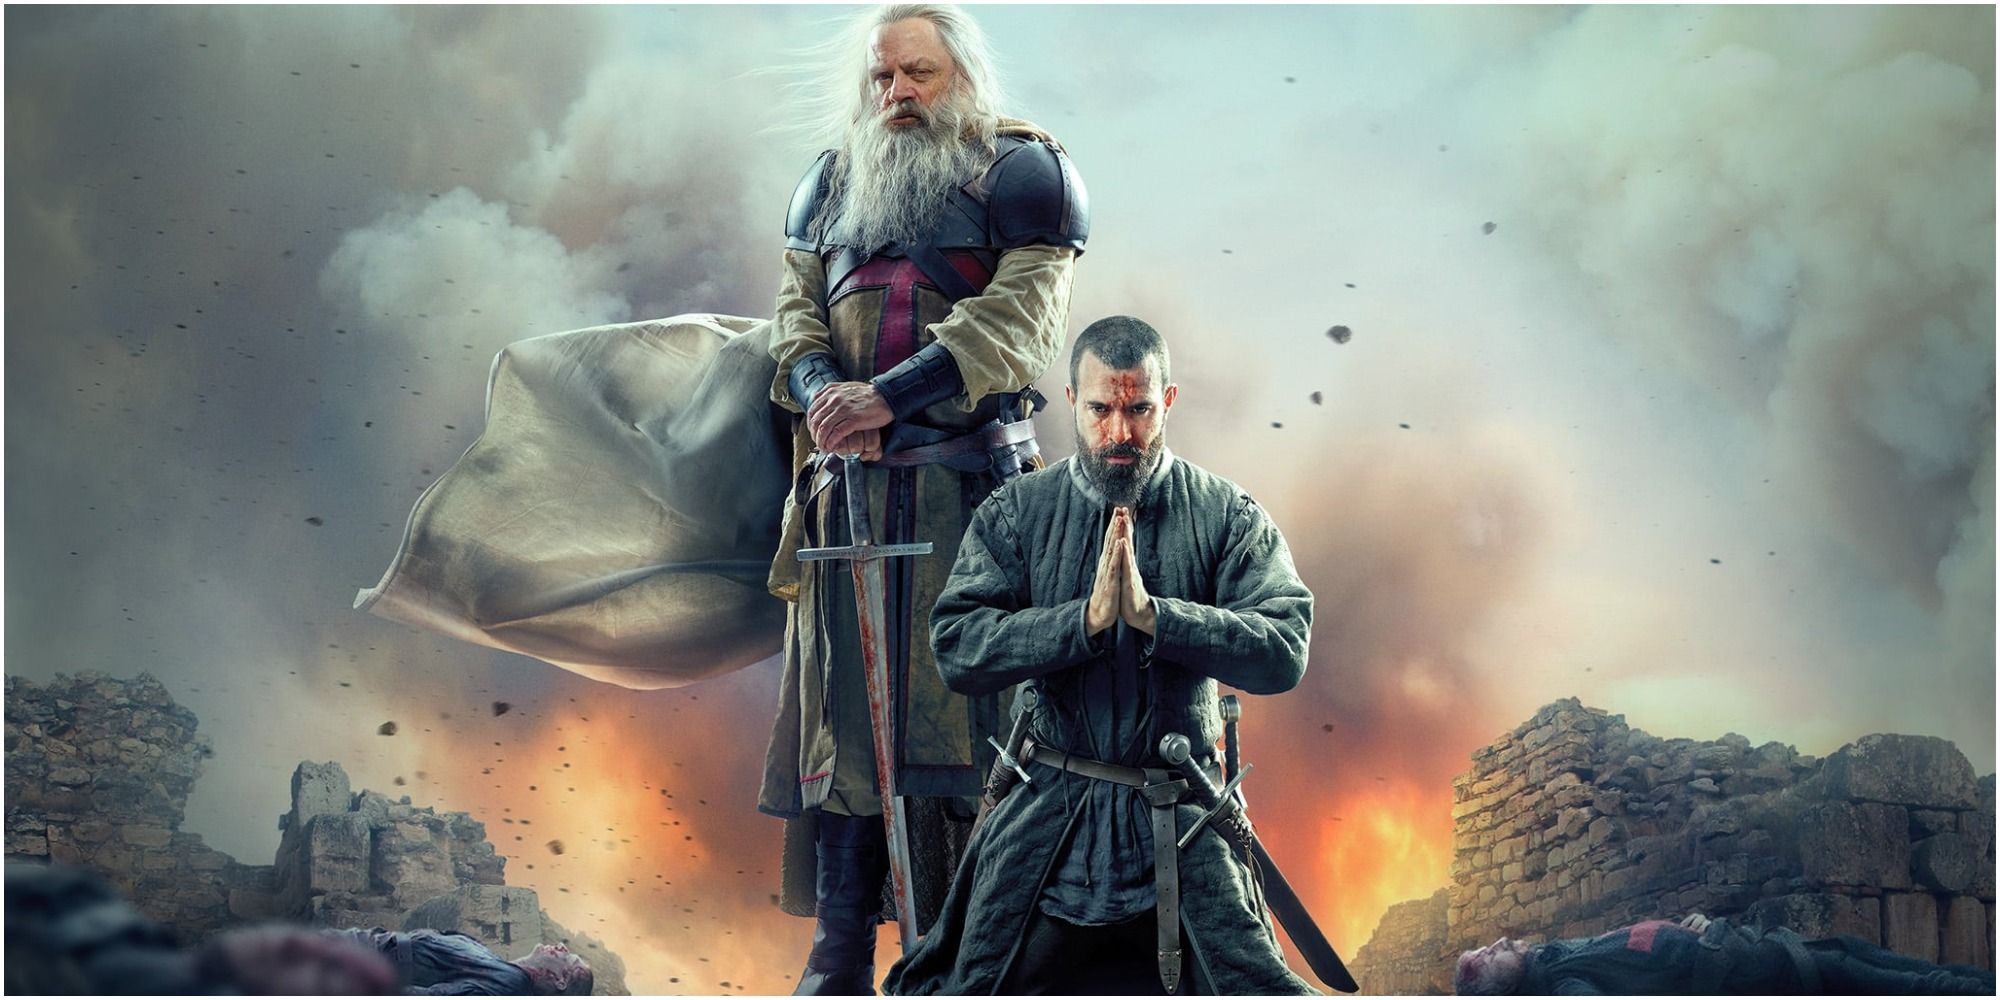 10 Shows To Watch If You Like Marco Polo